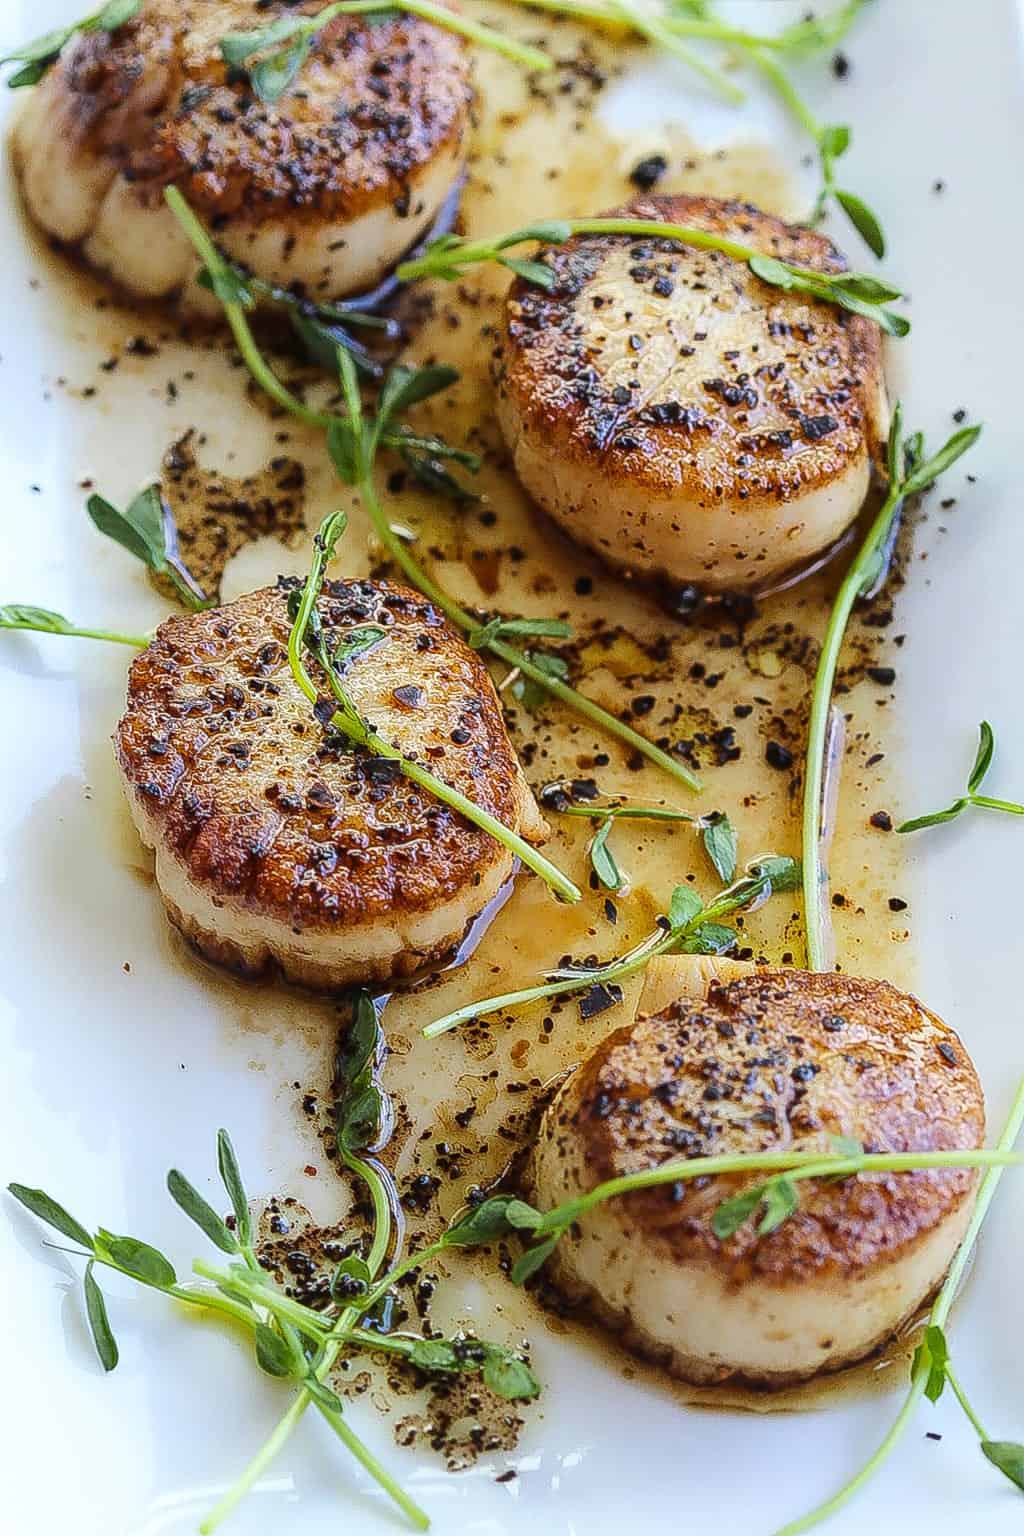 pan-seared scallops recipe plated with herbs and coffee vinaigrette